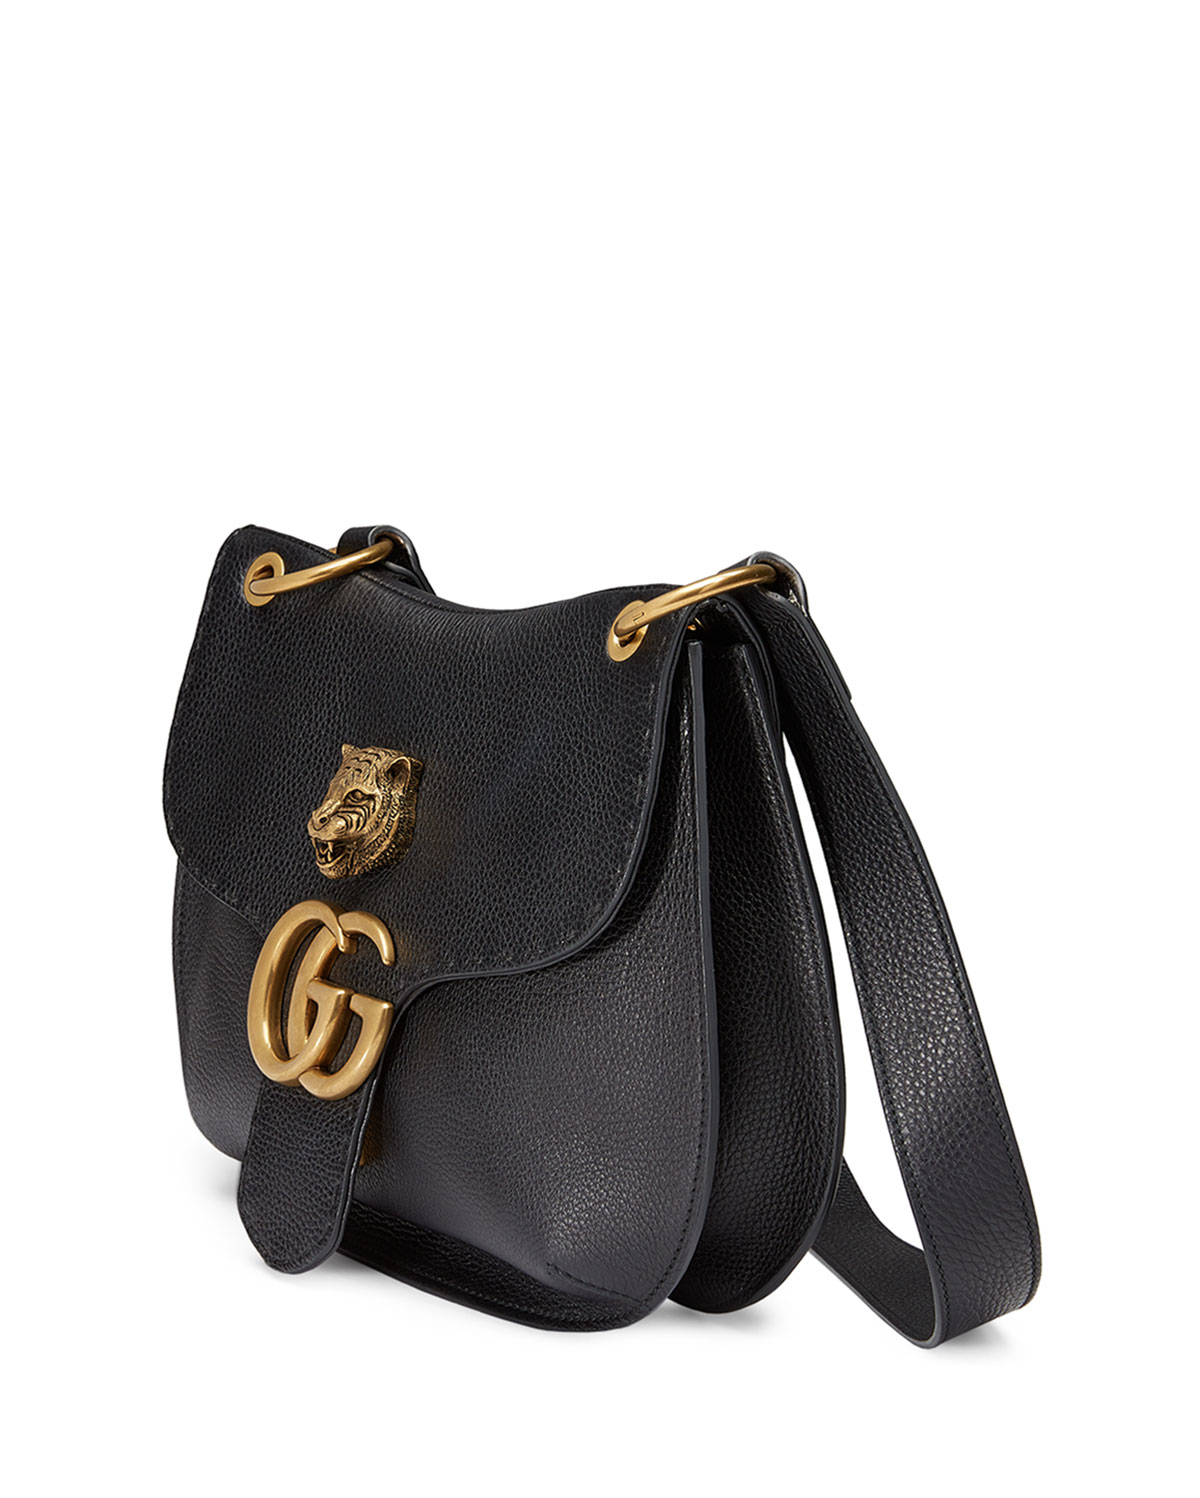 Lyst - Gucci Gg Marmont Leather Tiger Bag in Black